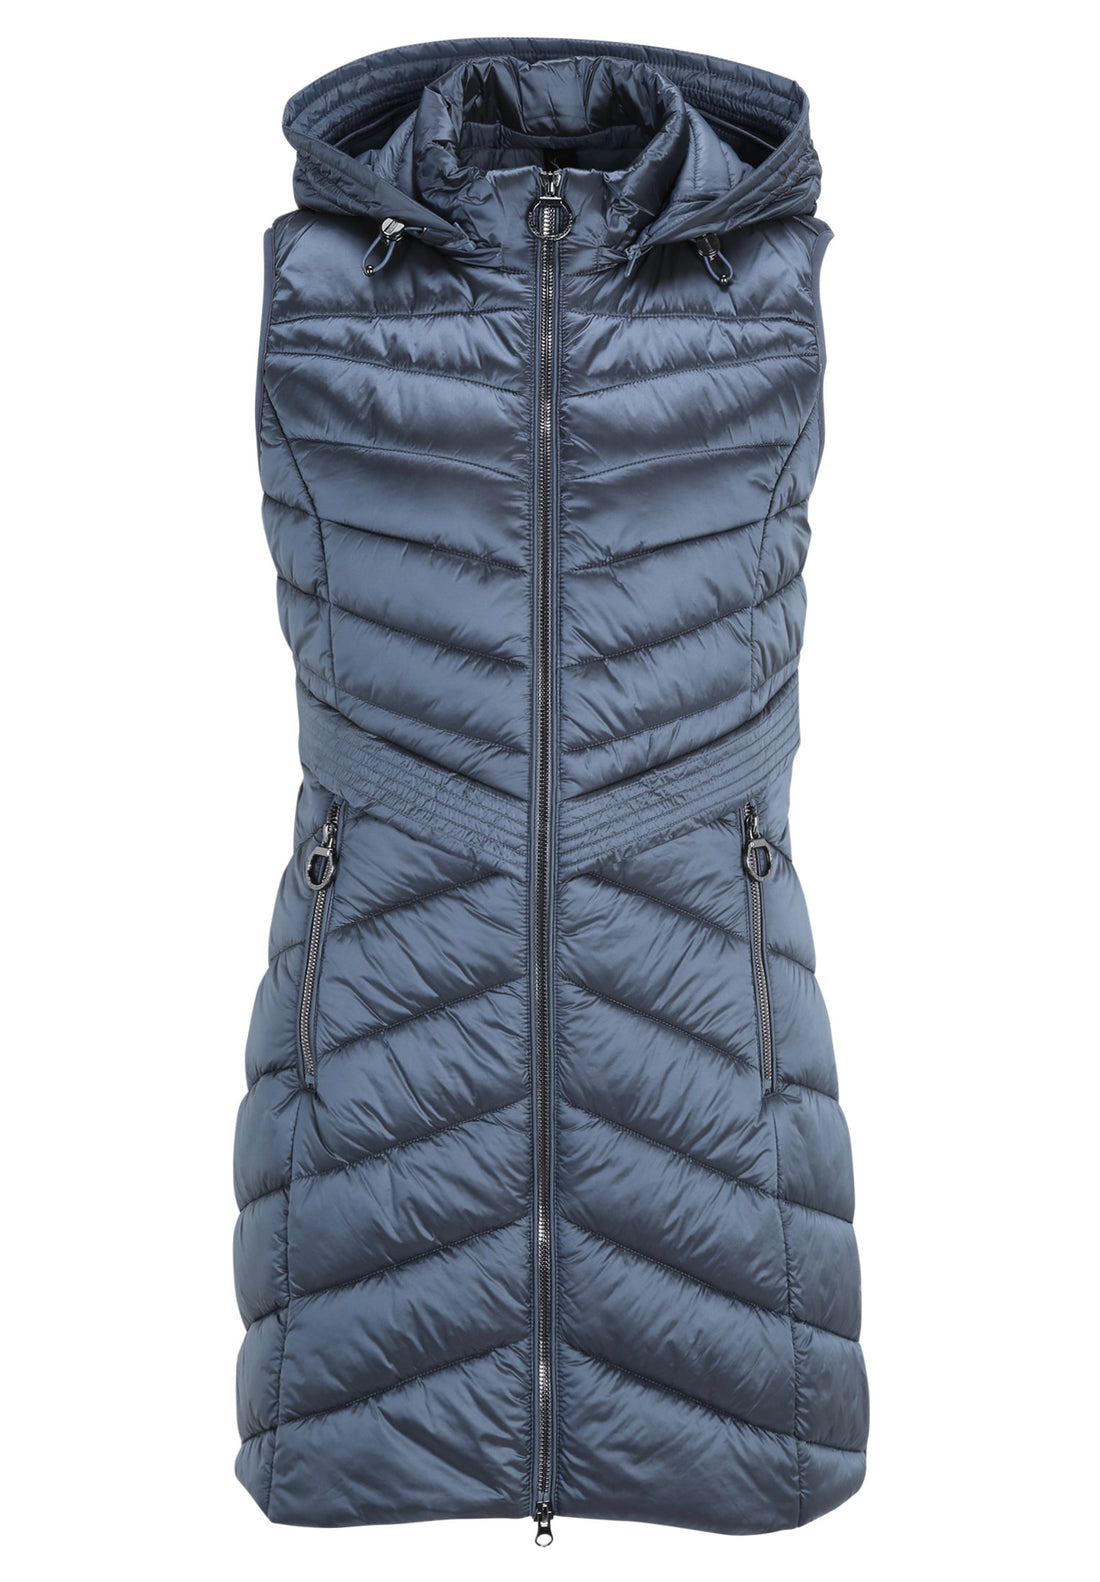 Blue Quilted Puffer Vest With Hood_7542-1537_8398_01